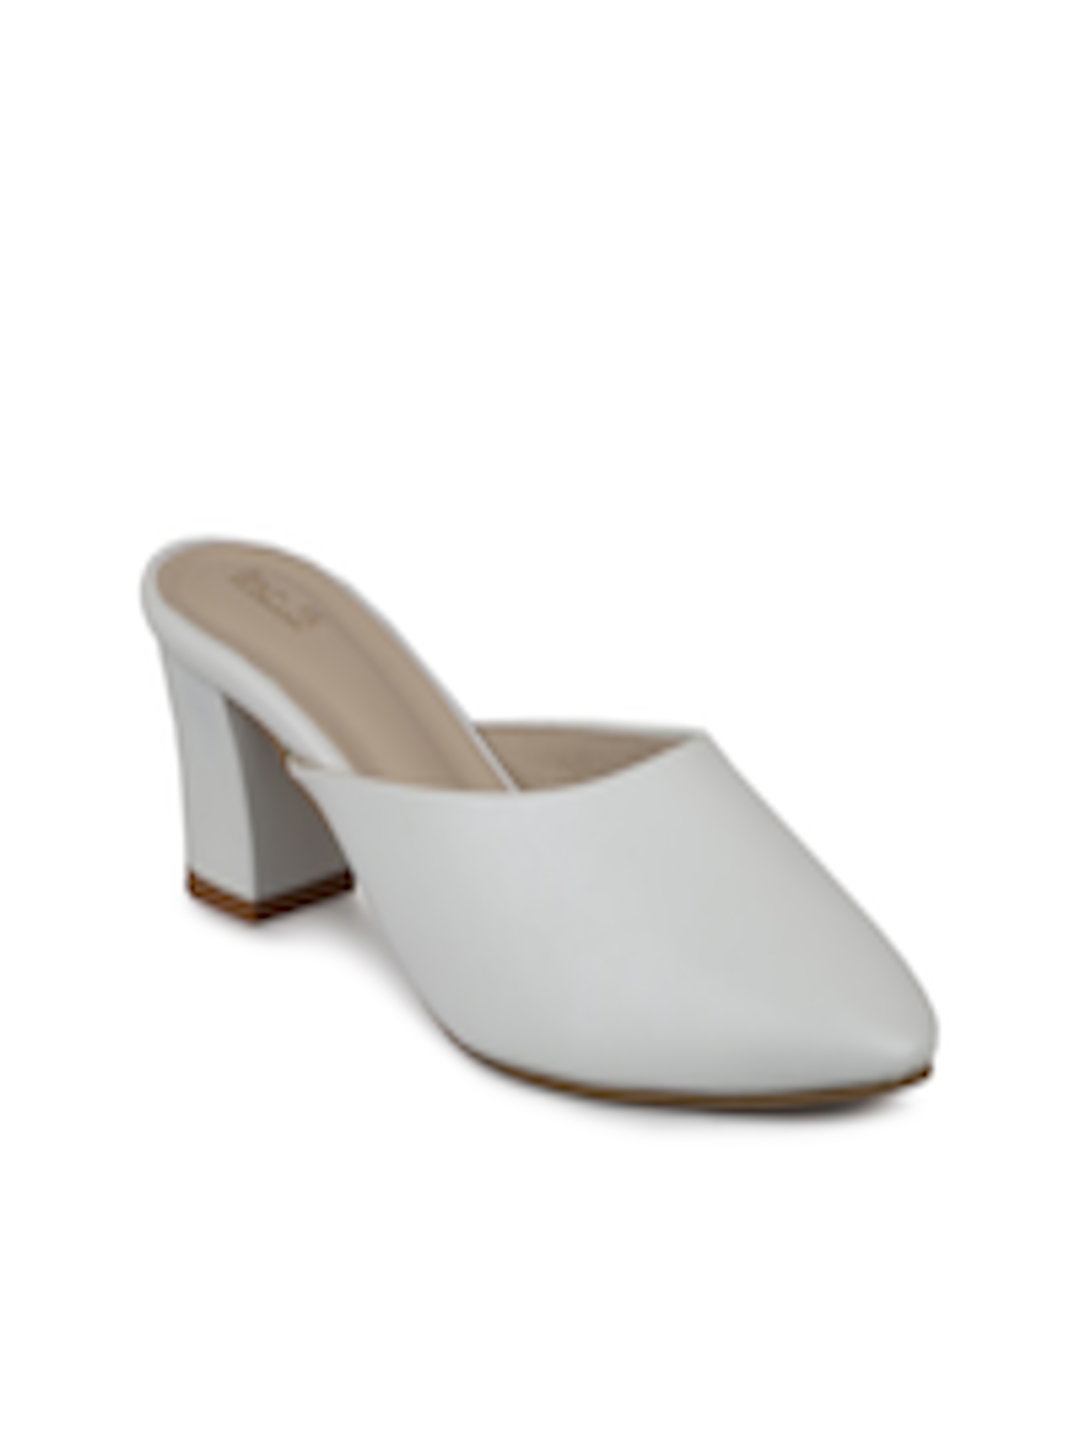 Buy Inc 5 White Solid Block Heeled Mules - Heels for Women 18258396 ...